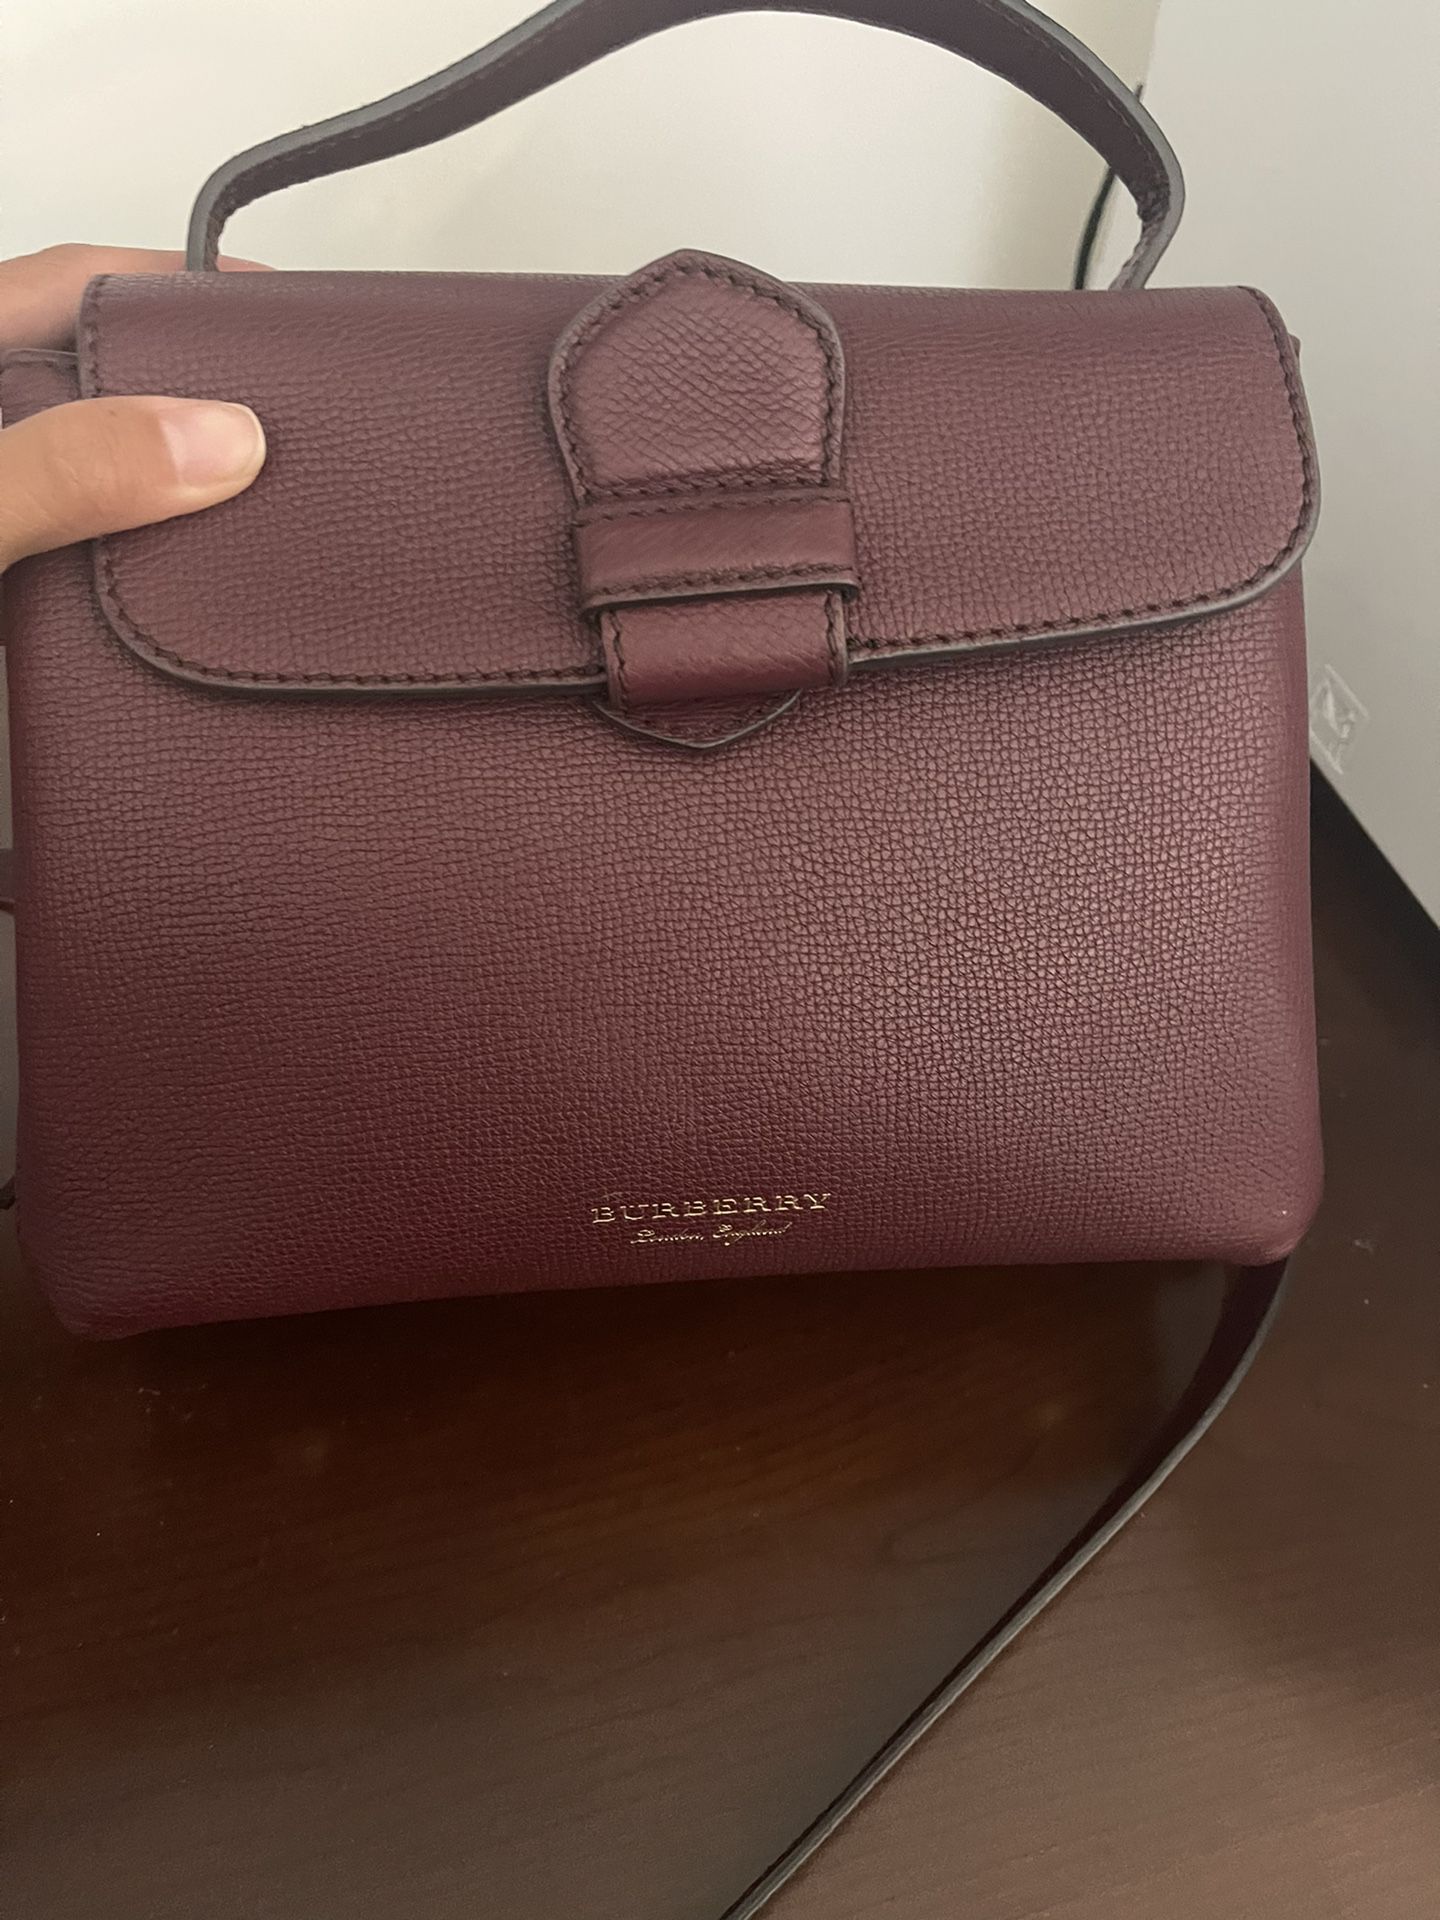 Authentic Burberry Purse With Wallet 